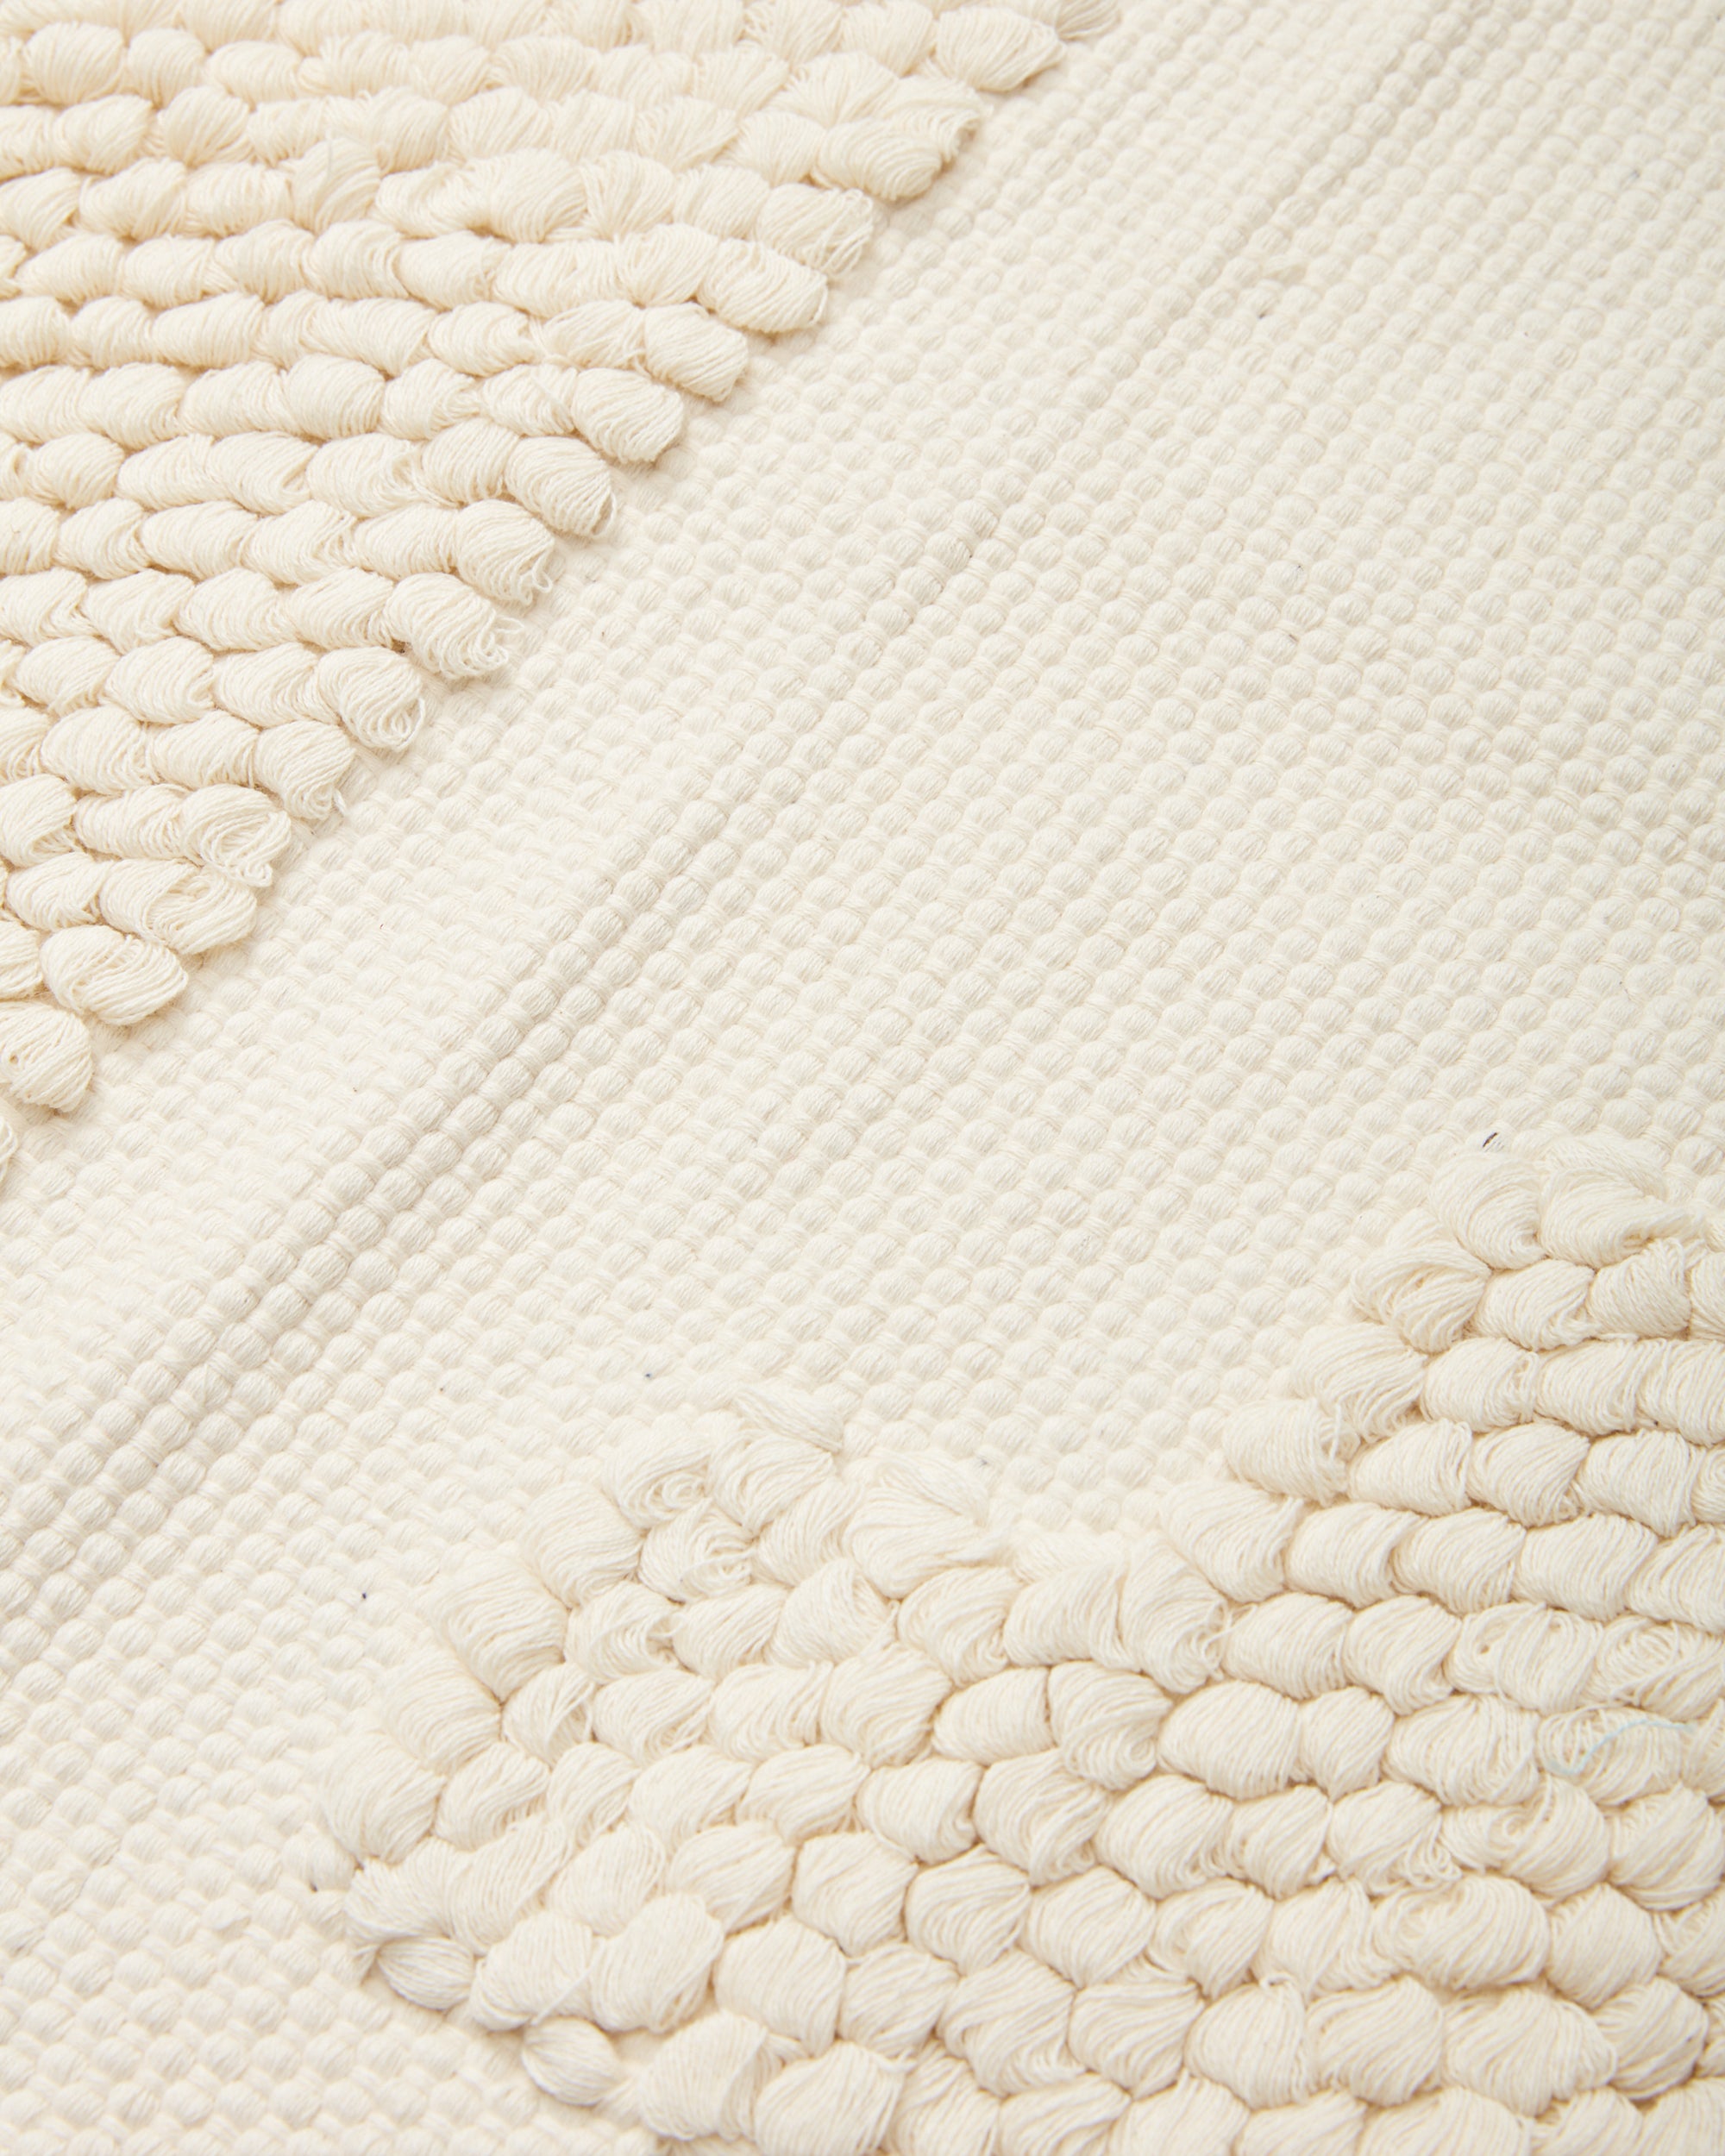 close-up detail of ethically handwoven organic cotton MINNA bathmat with textural pattern, cream, white